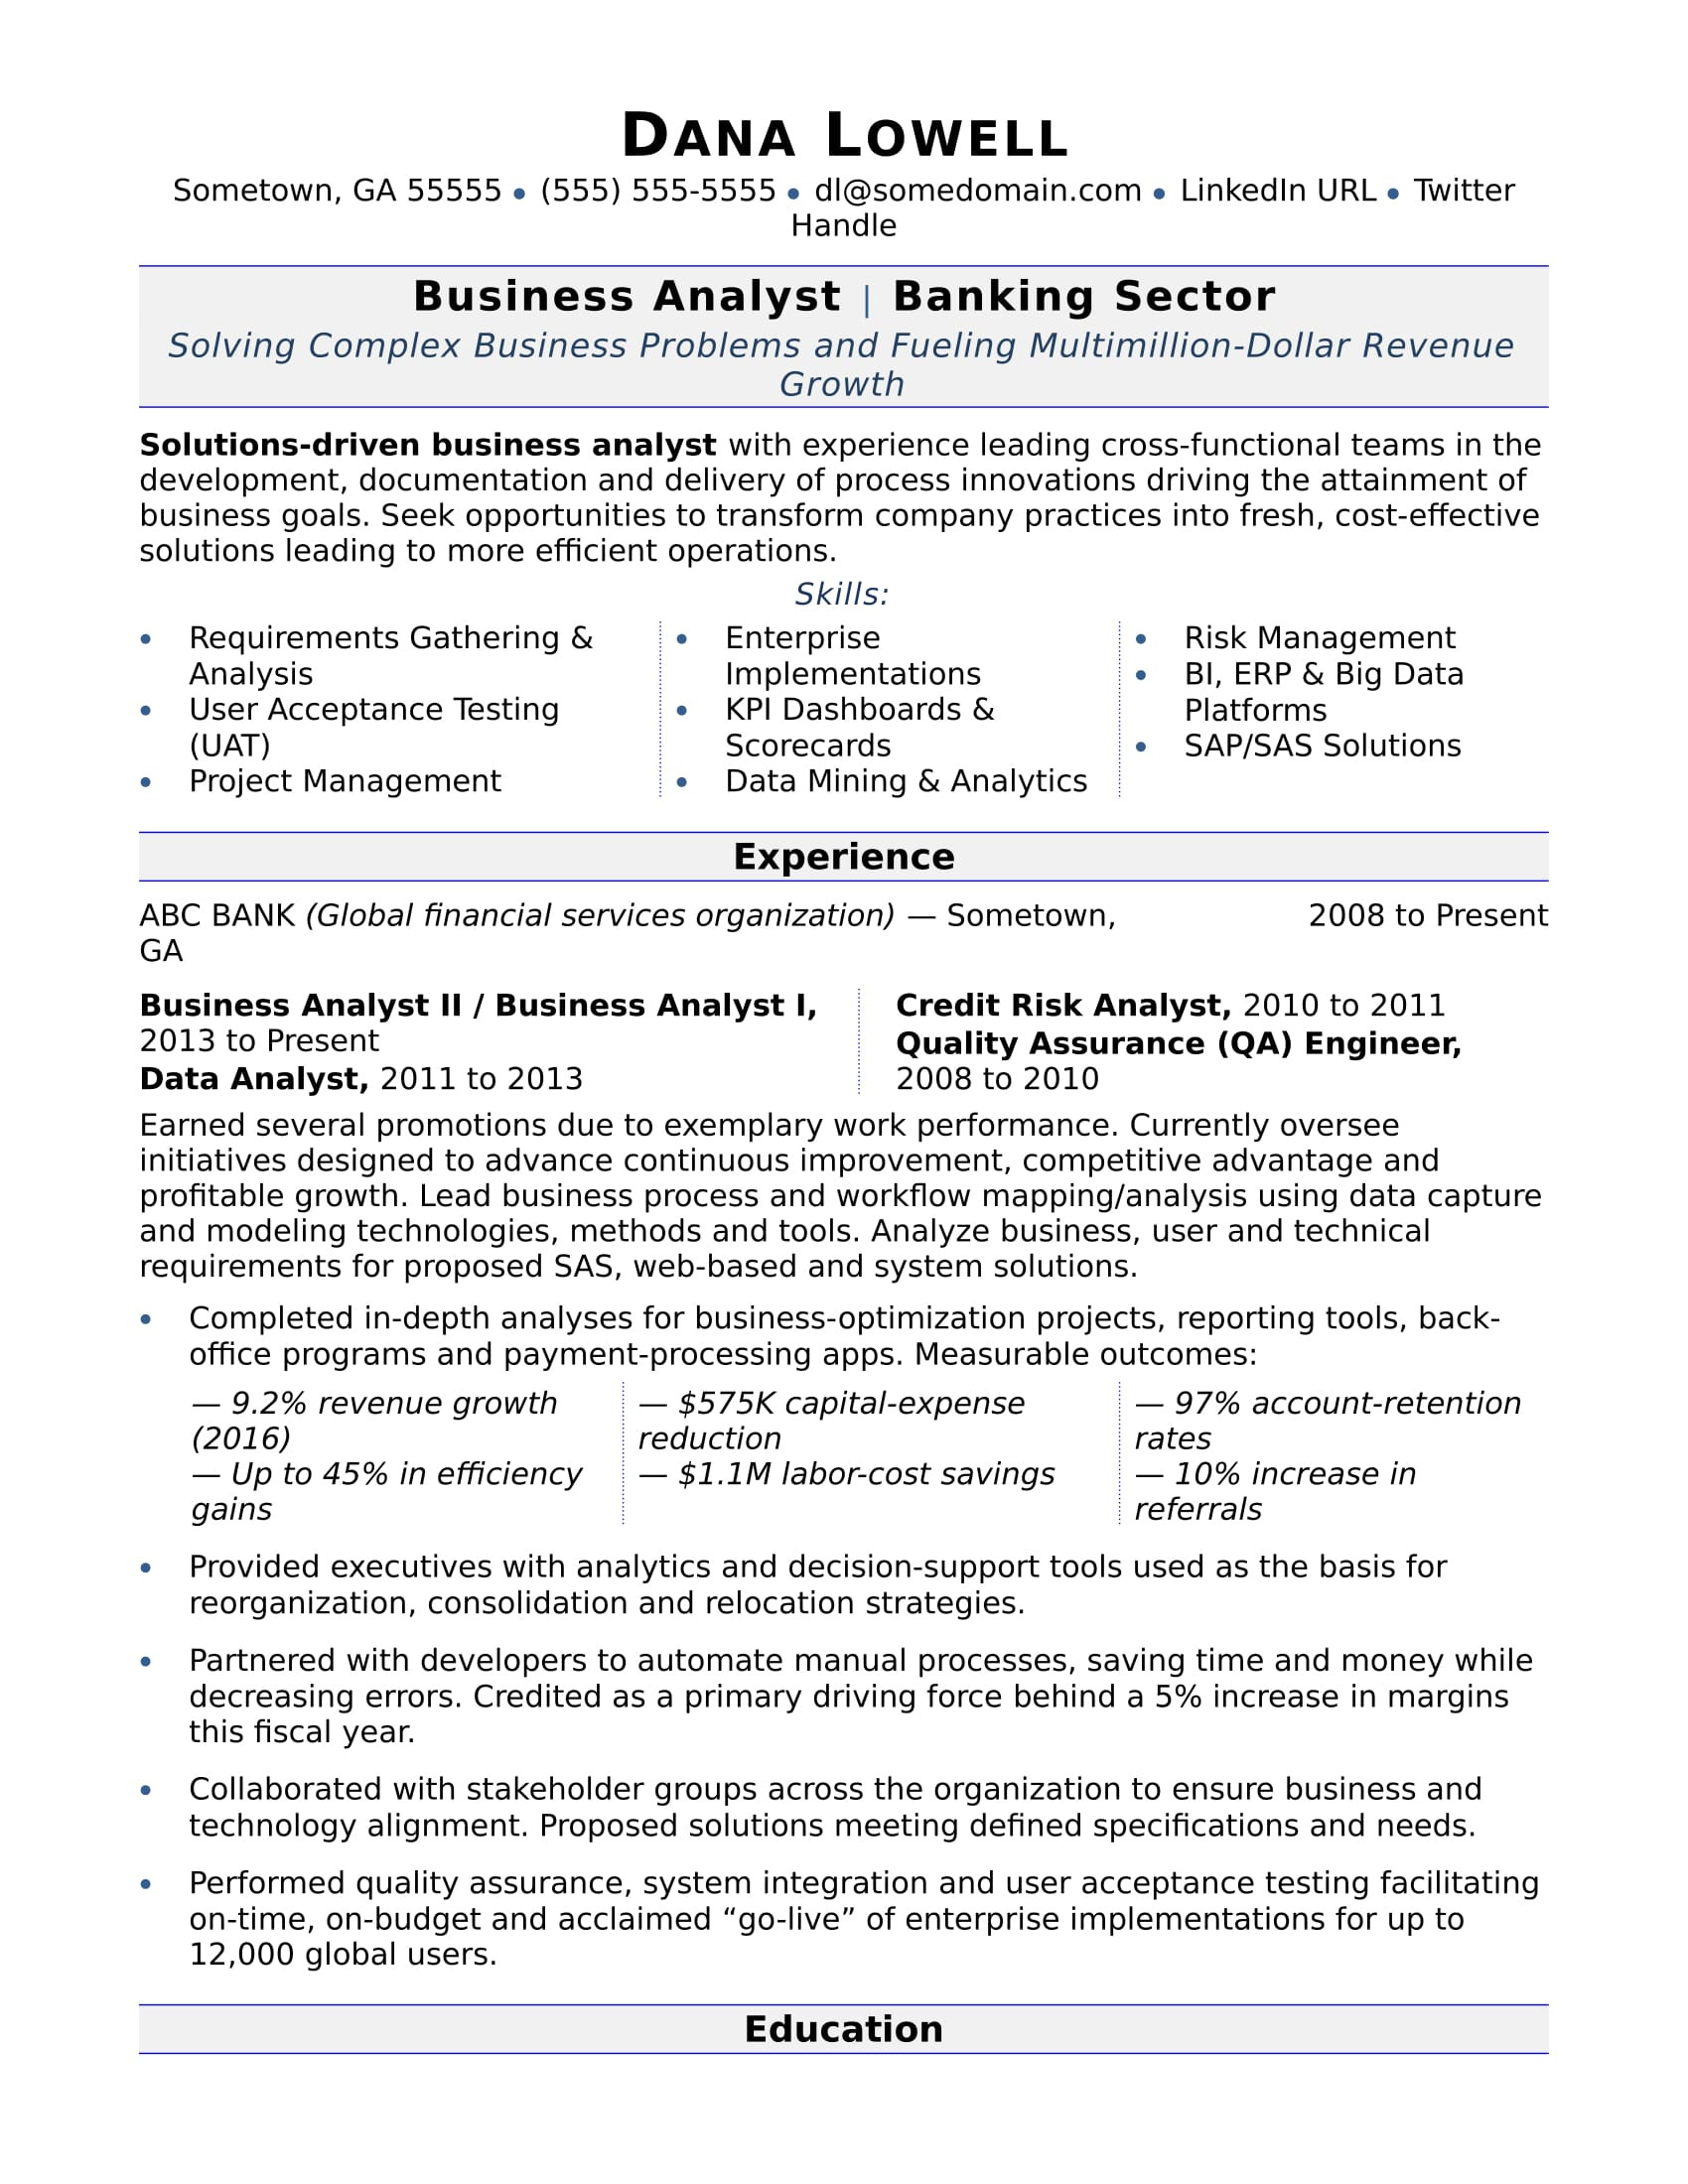 Sample Resume for Business Analyst Profile Business Analyst Resume Monster.com